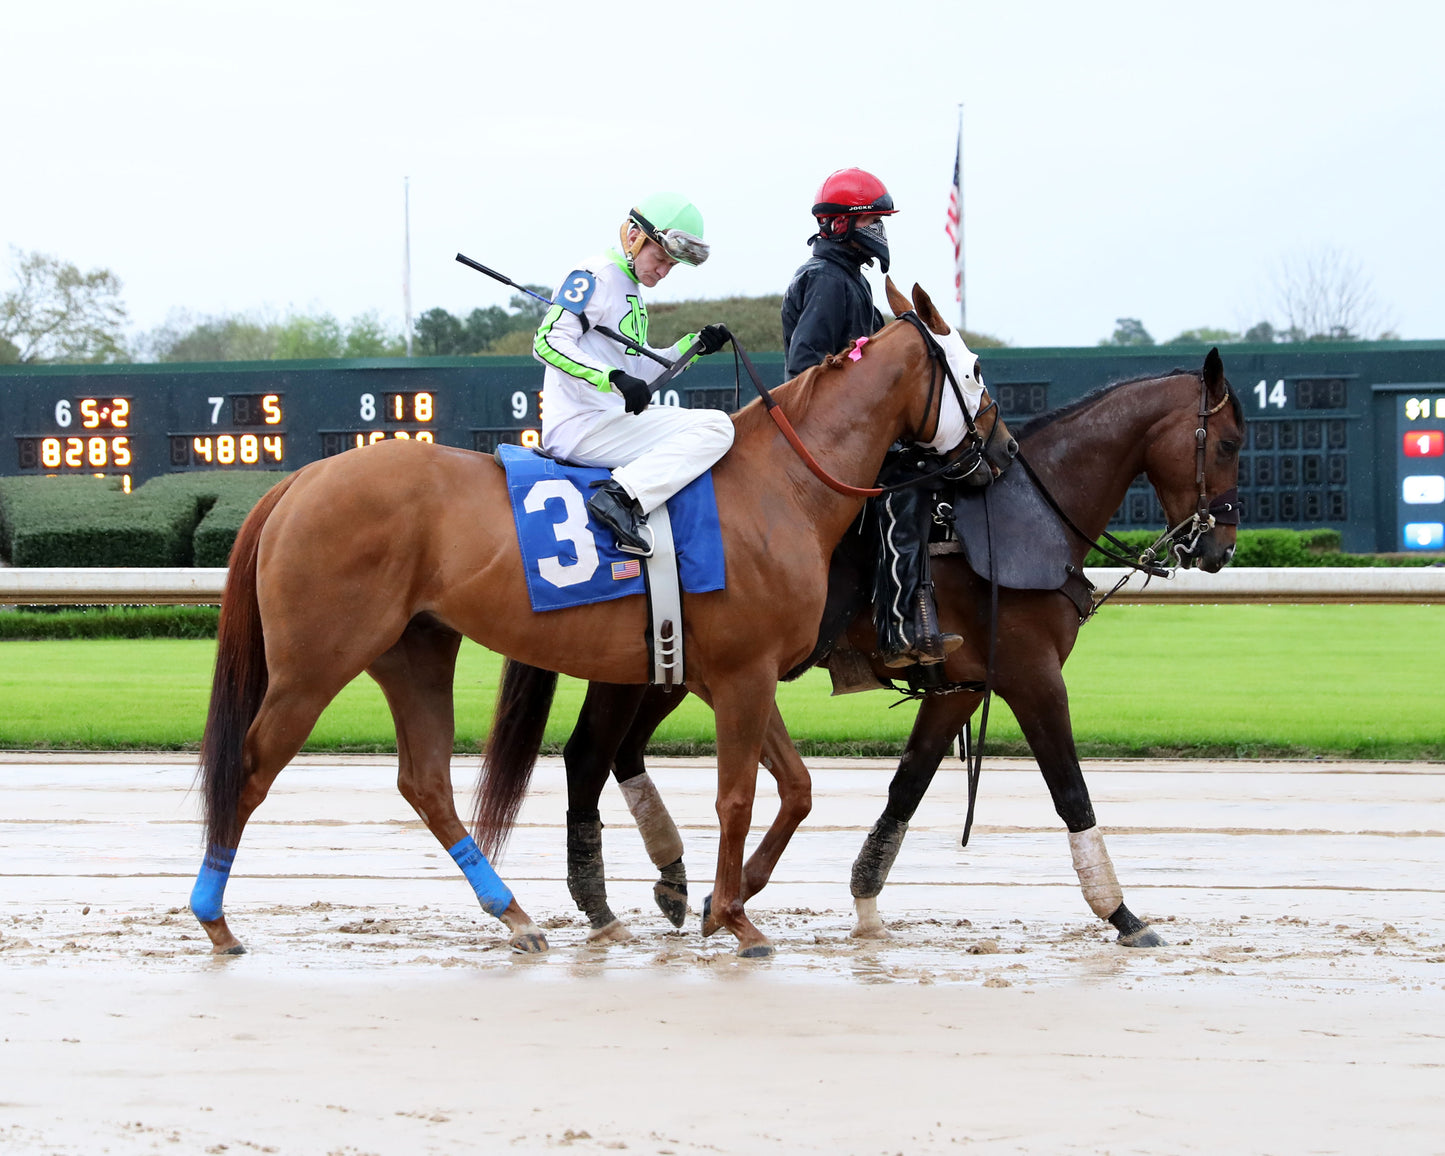 K J'S NOBILITY - The Nodouble Breeders' Stakes - 12th Running - 03-28-20 - R09 - OP - Post Parade 01